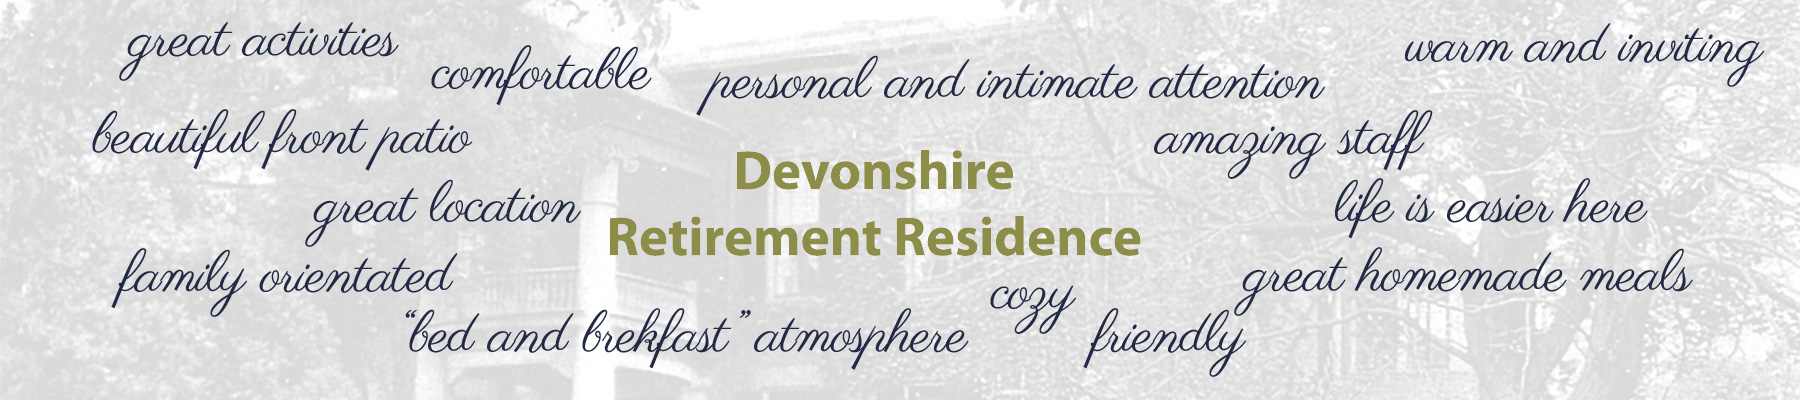 Devonshire Retirement Residence | Friendly, cozy, family orientated, great homemade meals, amazing staff, beautiful front patio, great activities, nice suites, inviting, warm, great location, comfortable